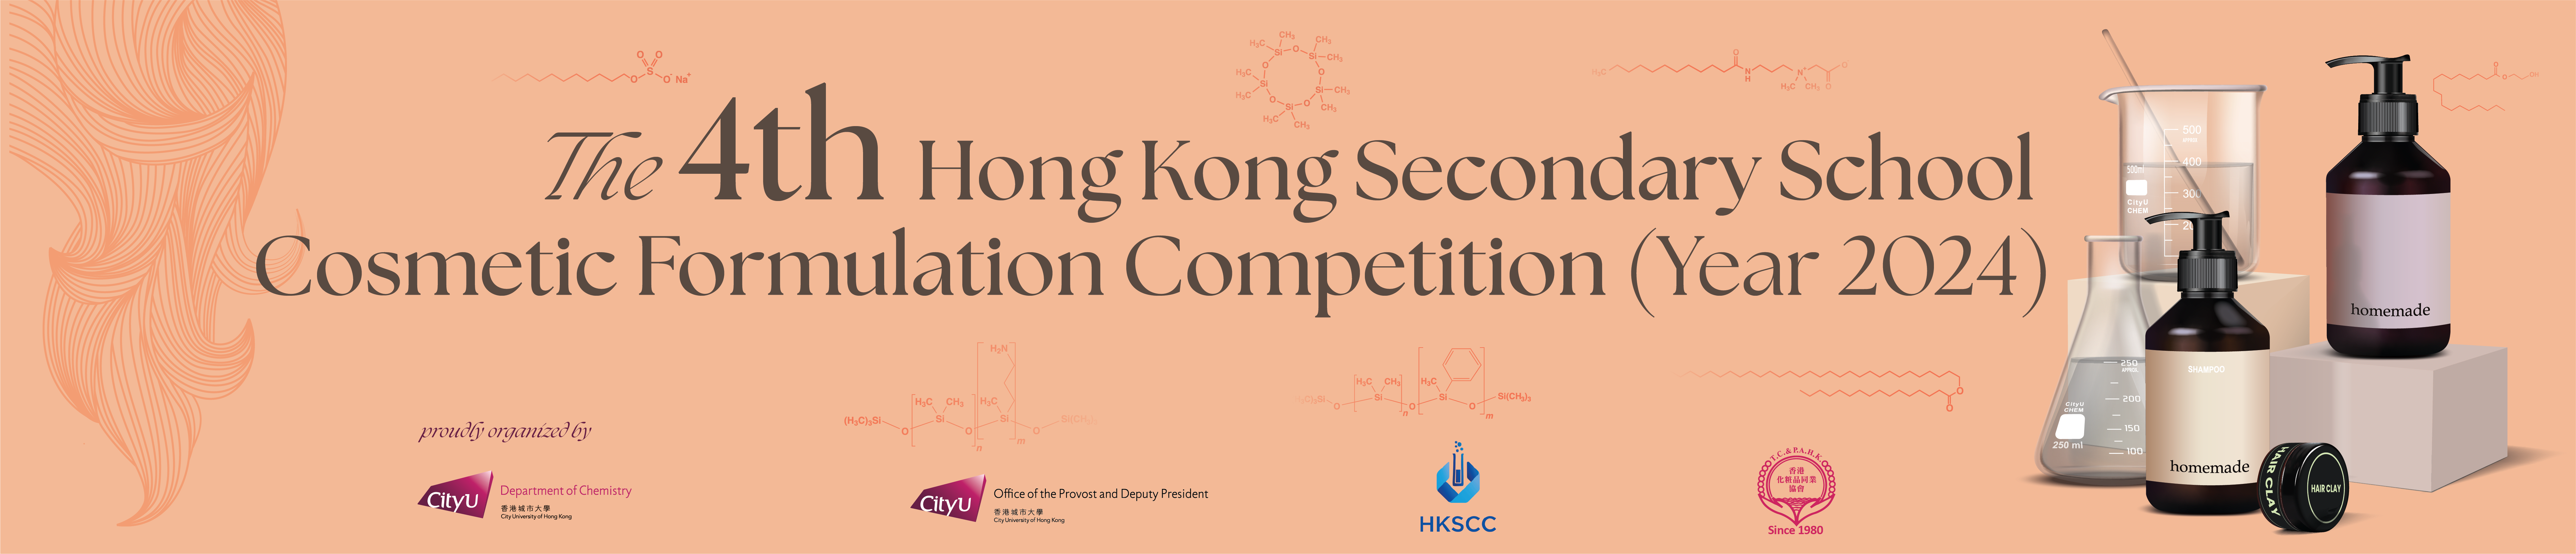 4th Cosmetic Formulation Competition